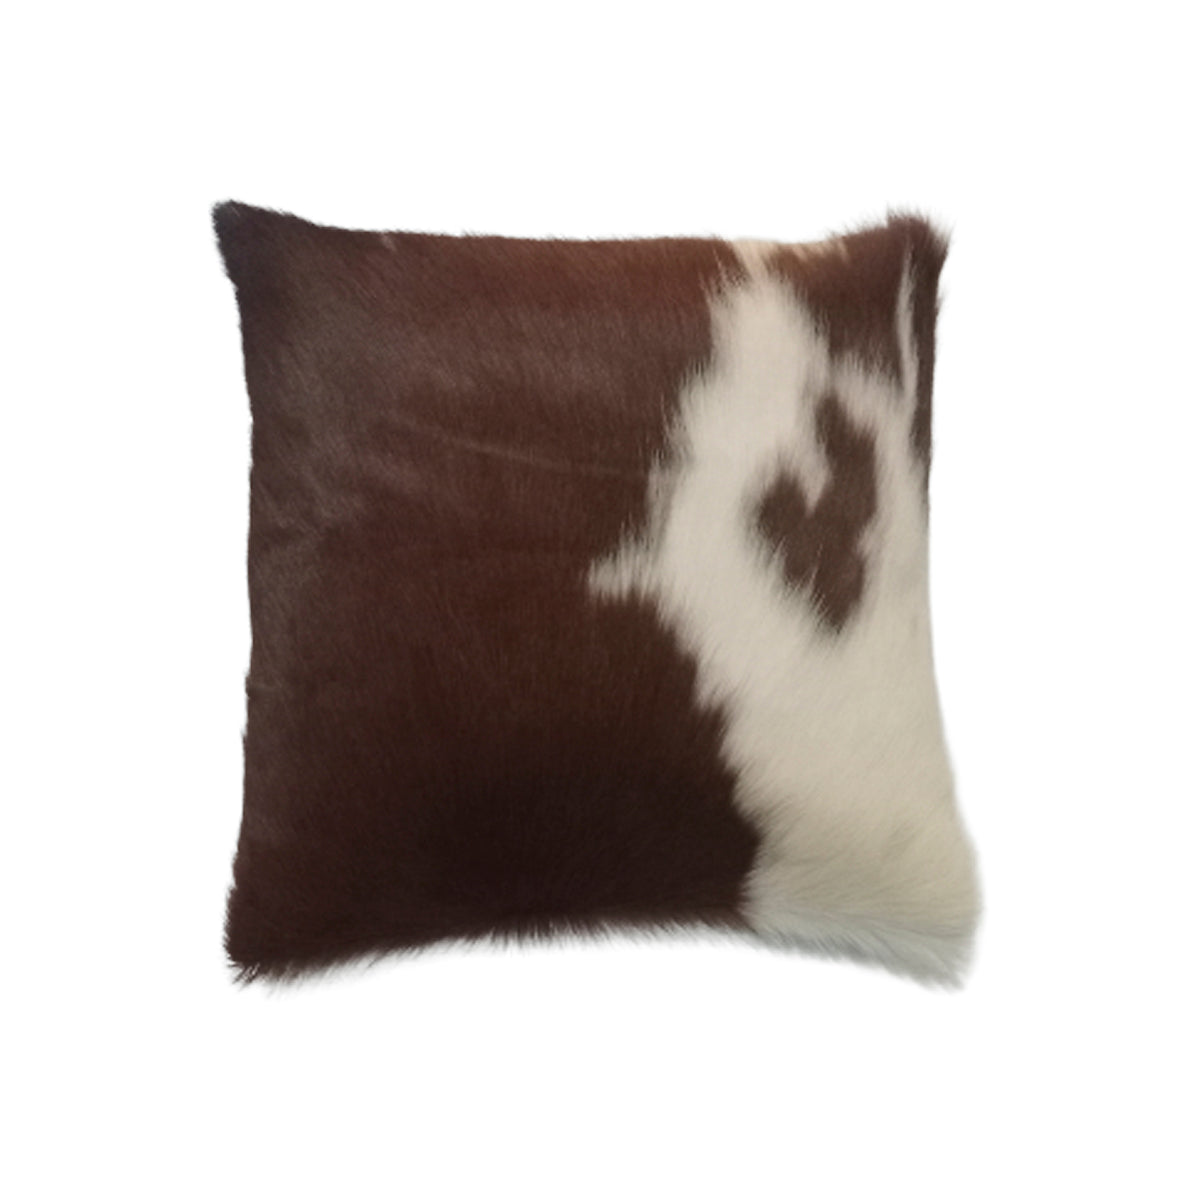 Cowhide Leather Saddle Cushion Cover